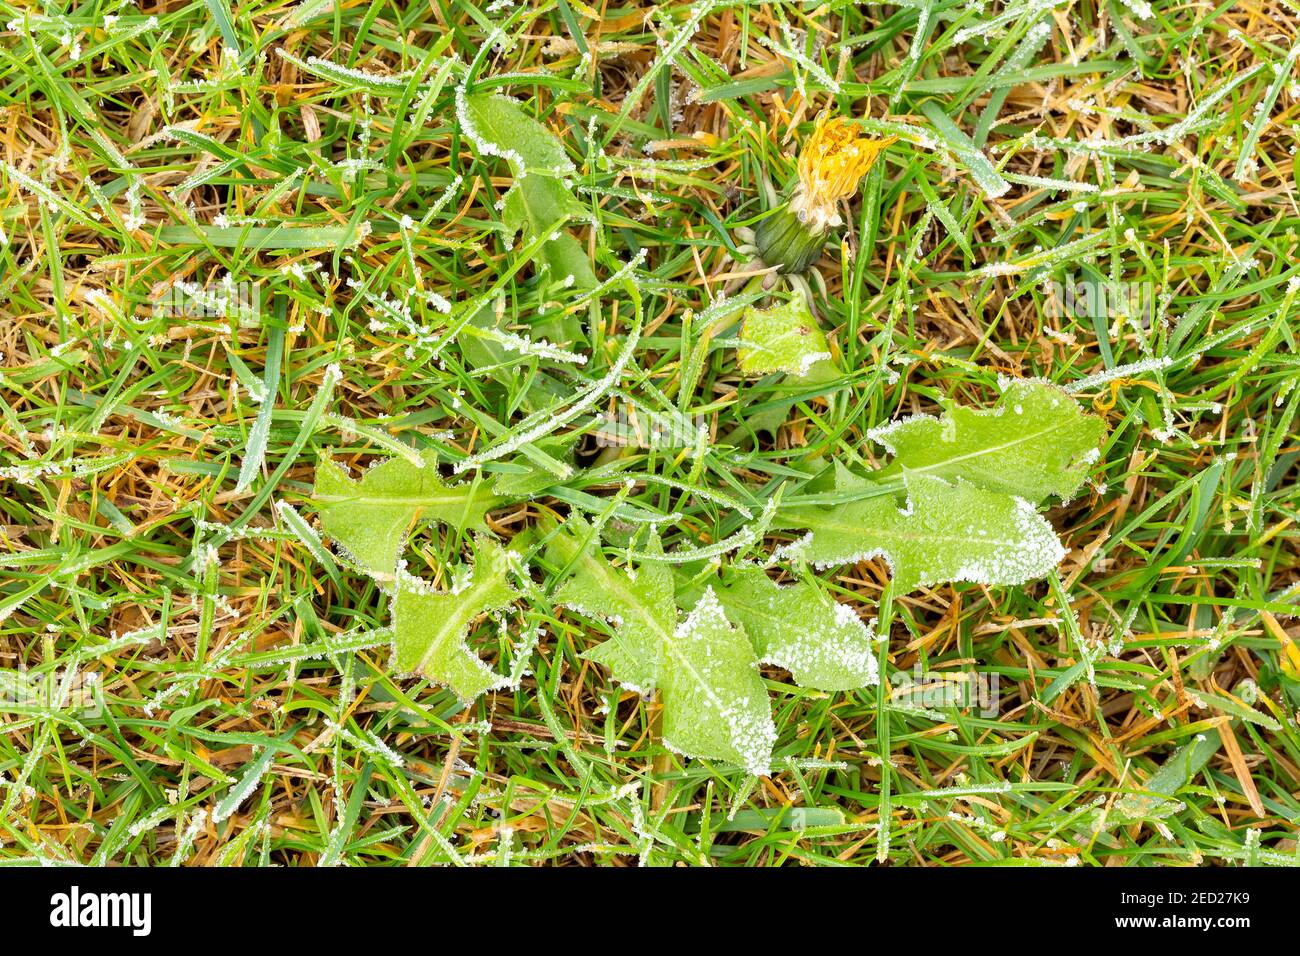 Lawn with frozen dandelion and ice coating. Lawn texture with brittle frozen water drops. Green yellow grass with icing. Top view, overhead shot. Gras Stock Photo